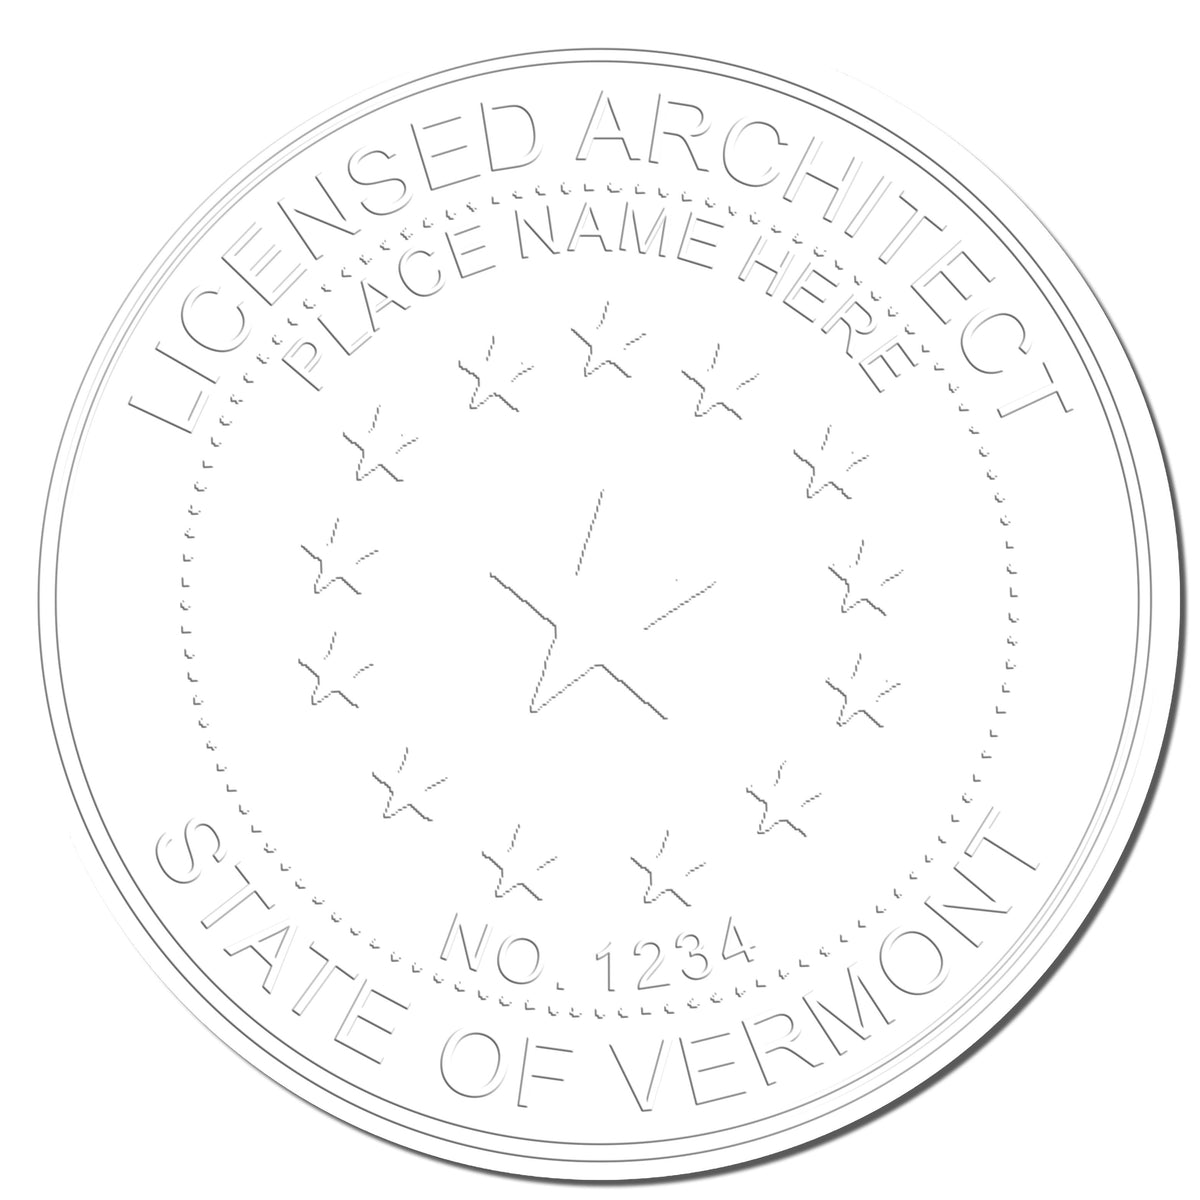 This paper is stamped with a sample imprint of the Hybrid Vermont Architect Seal, signifying its quality and reliability.